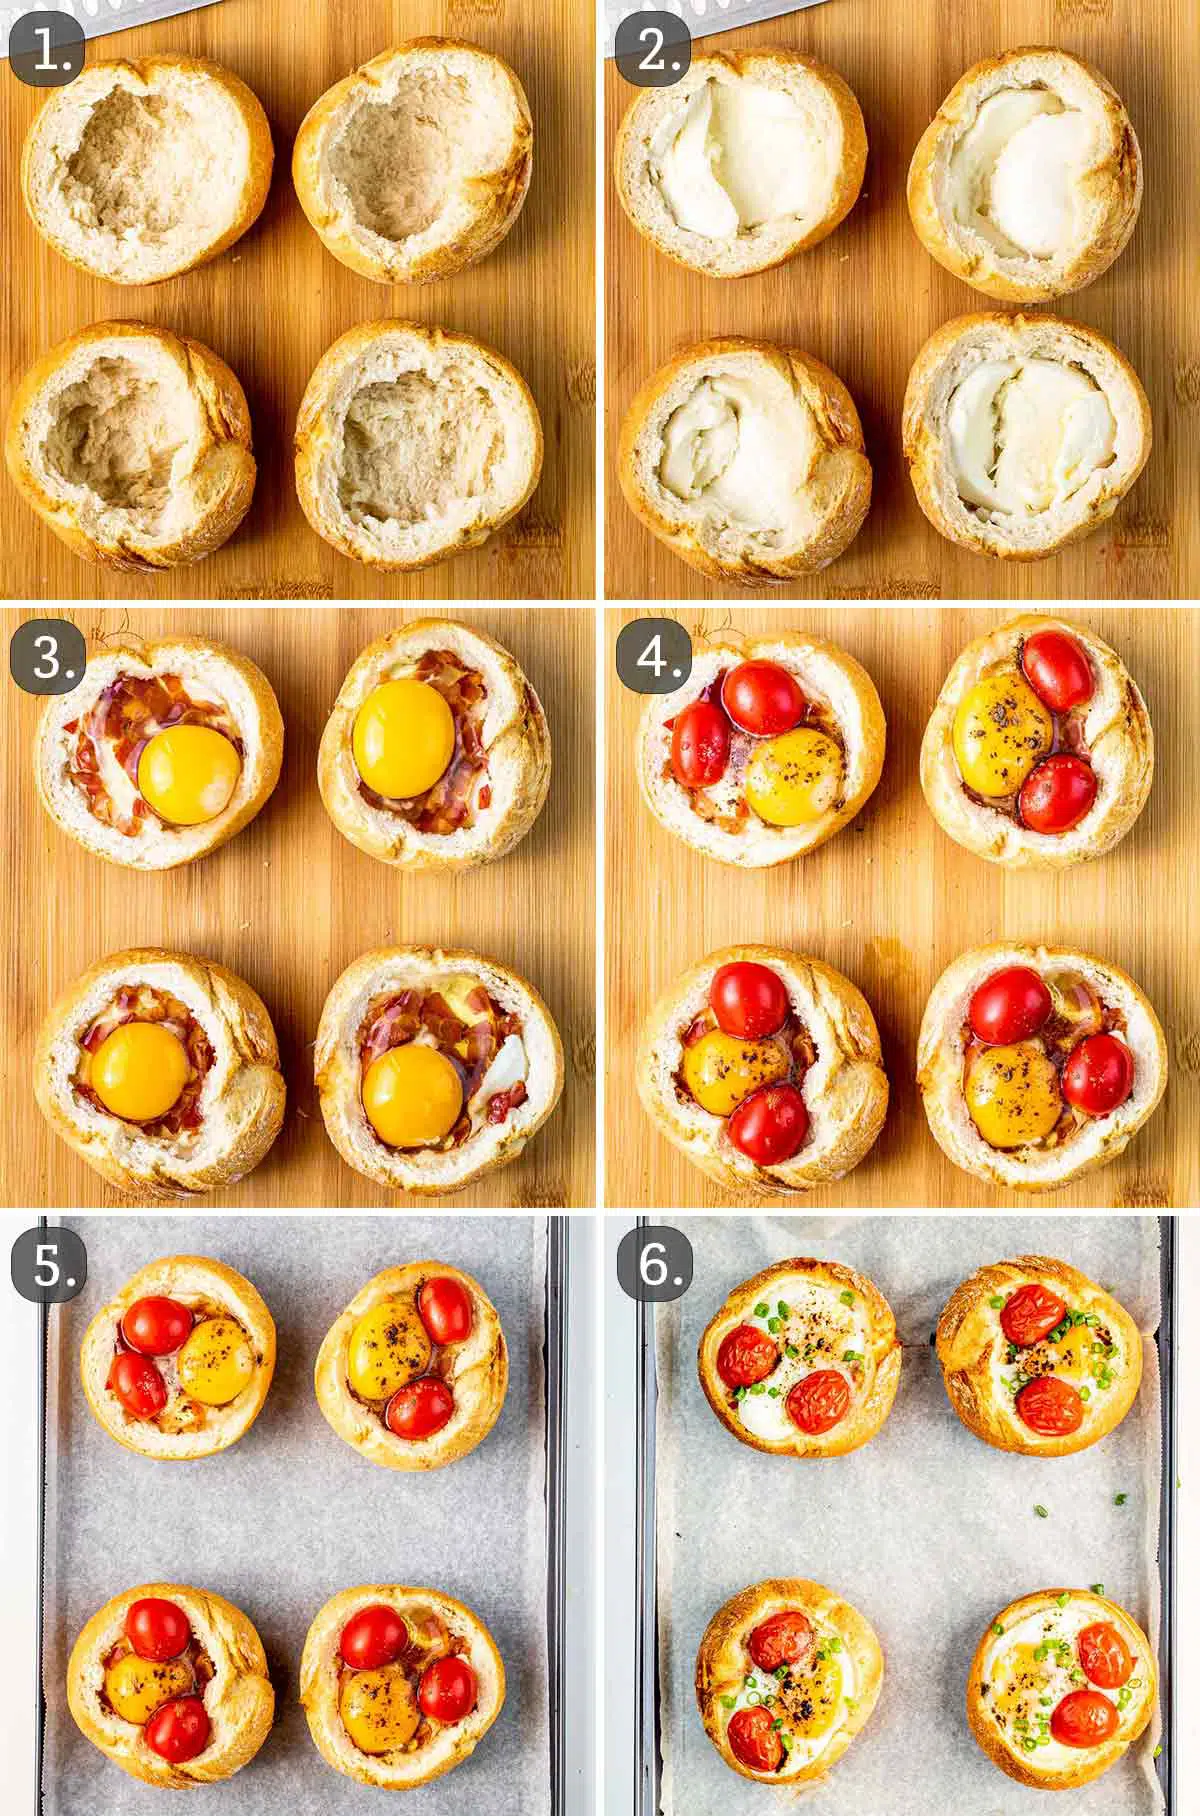 detailed process shots showing how to make eggs and bacon breakfast bowls.